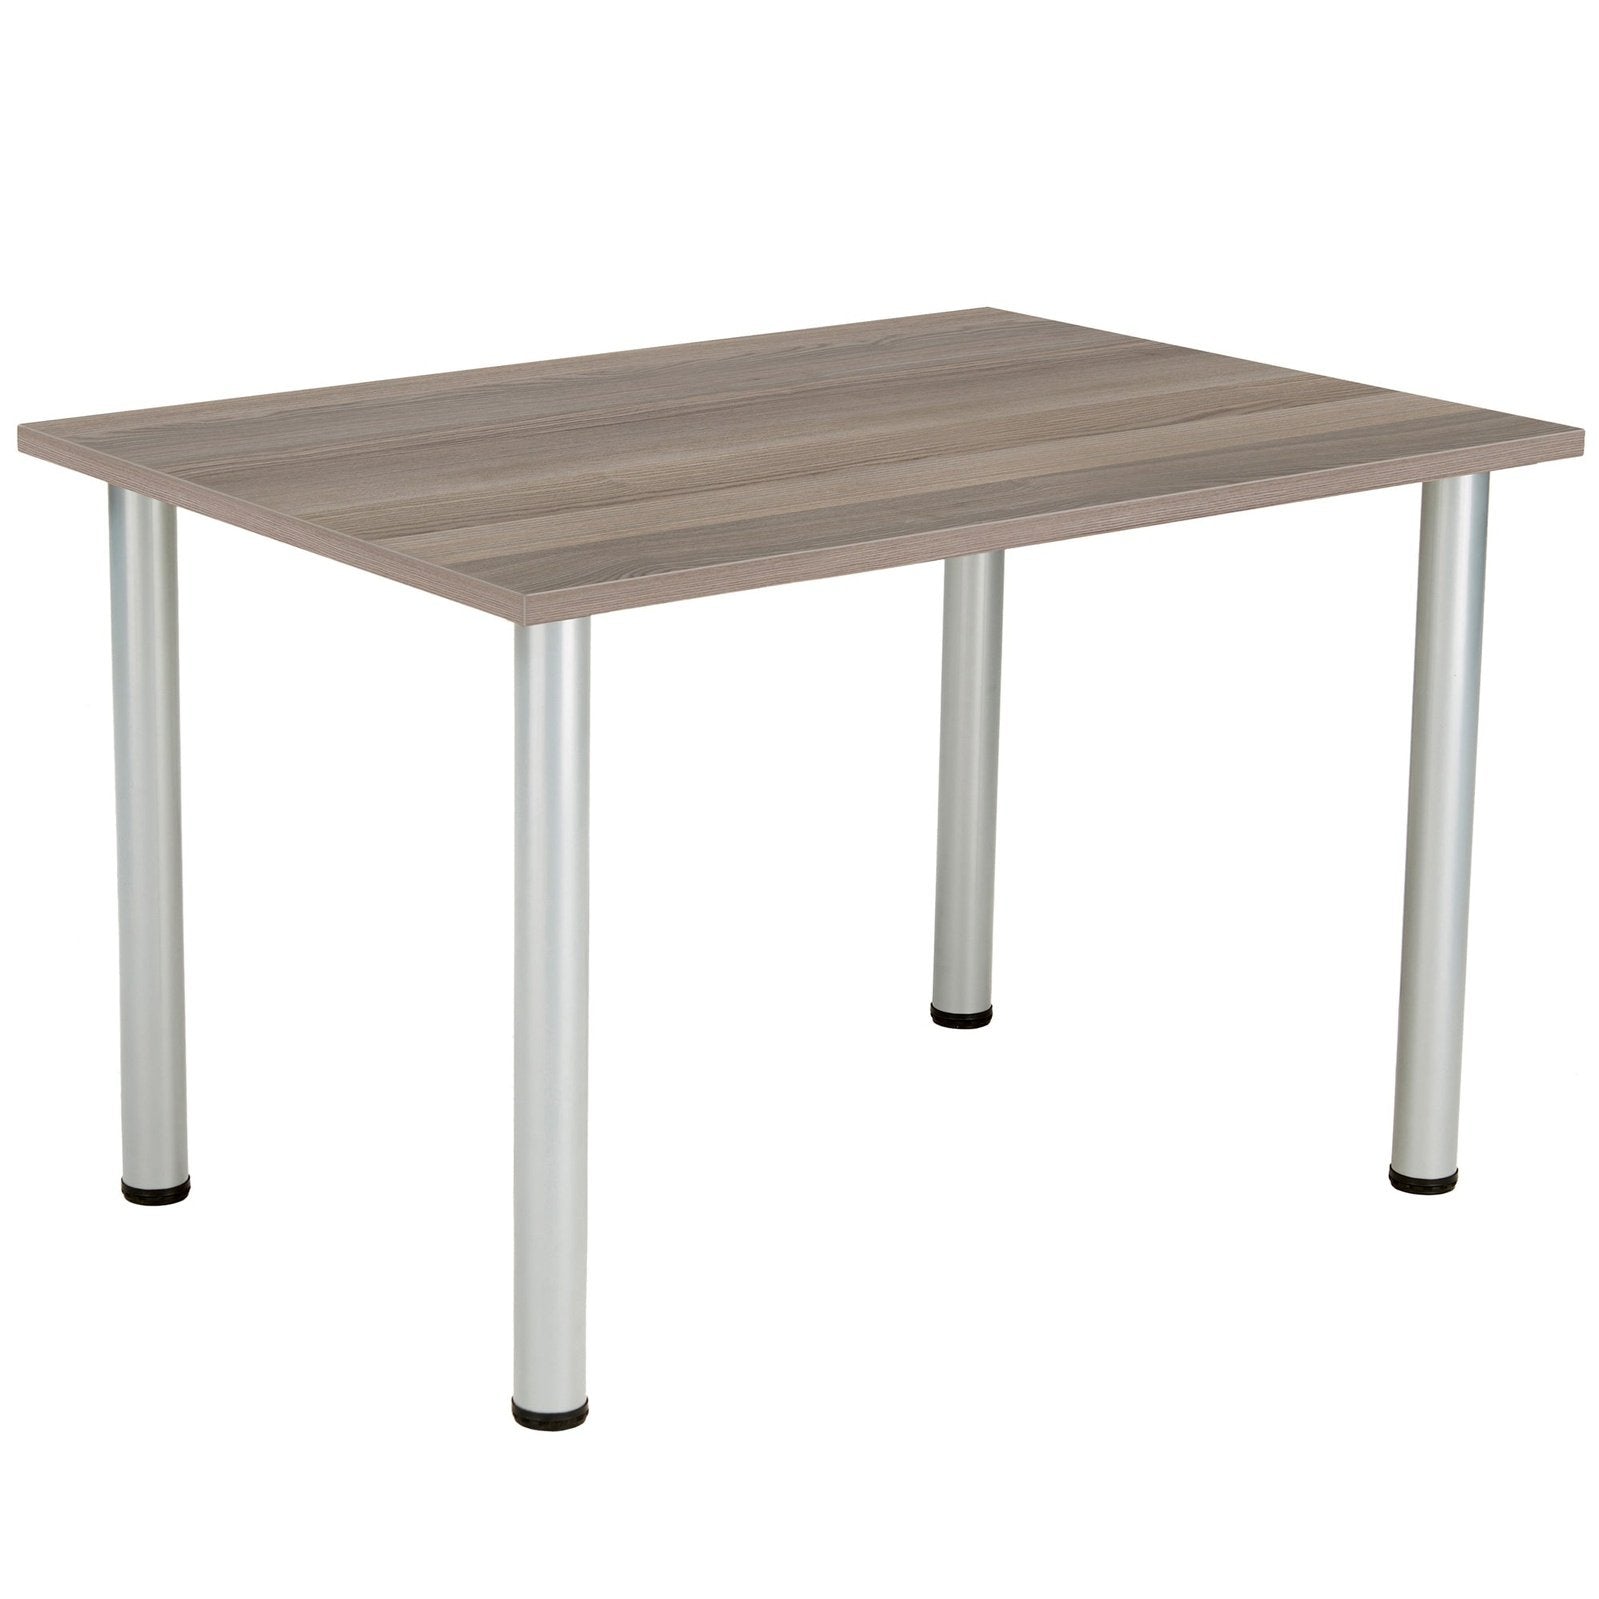 One Fraction Plus Straight 1200mm Meeting Table